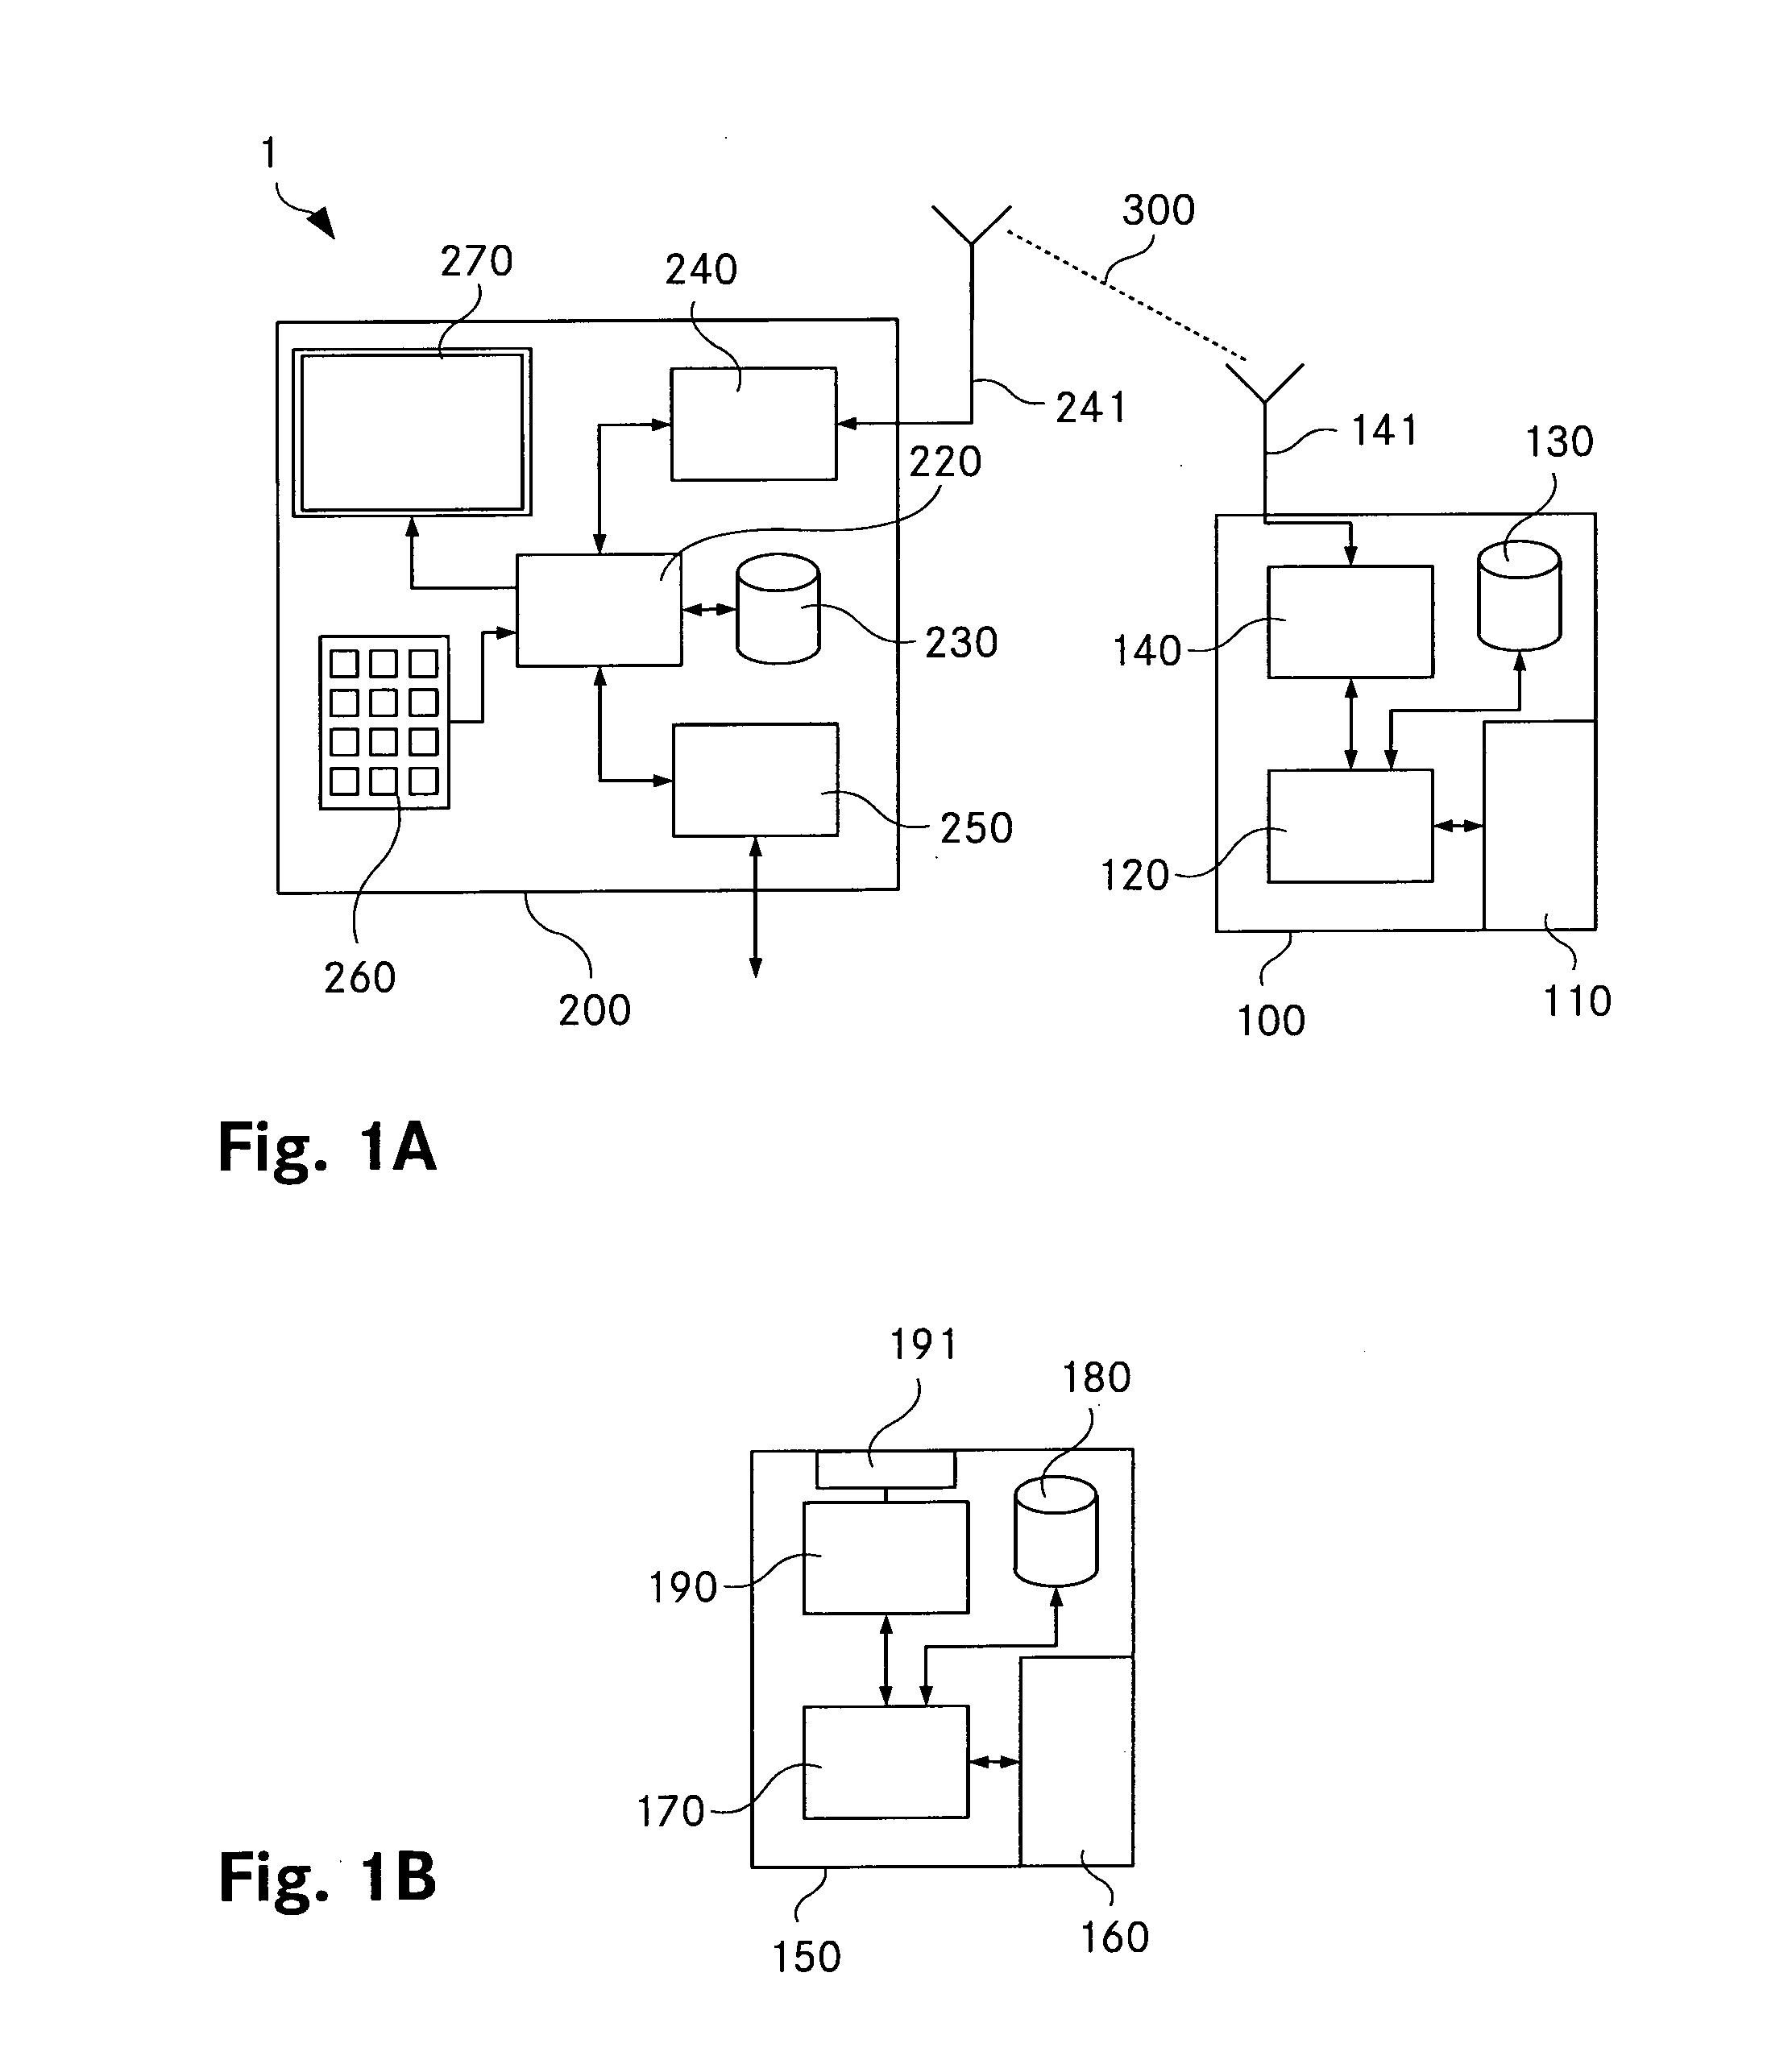 Method and glucose monitoring system for monitoring individual metabolic response and for generating nutritional feedback